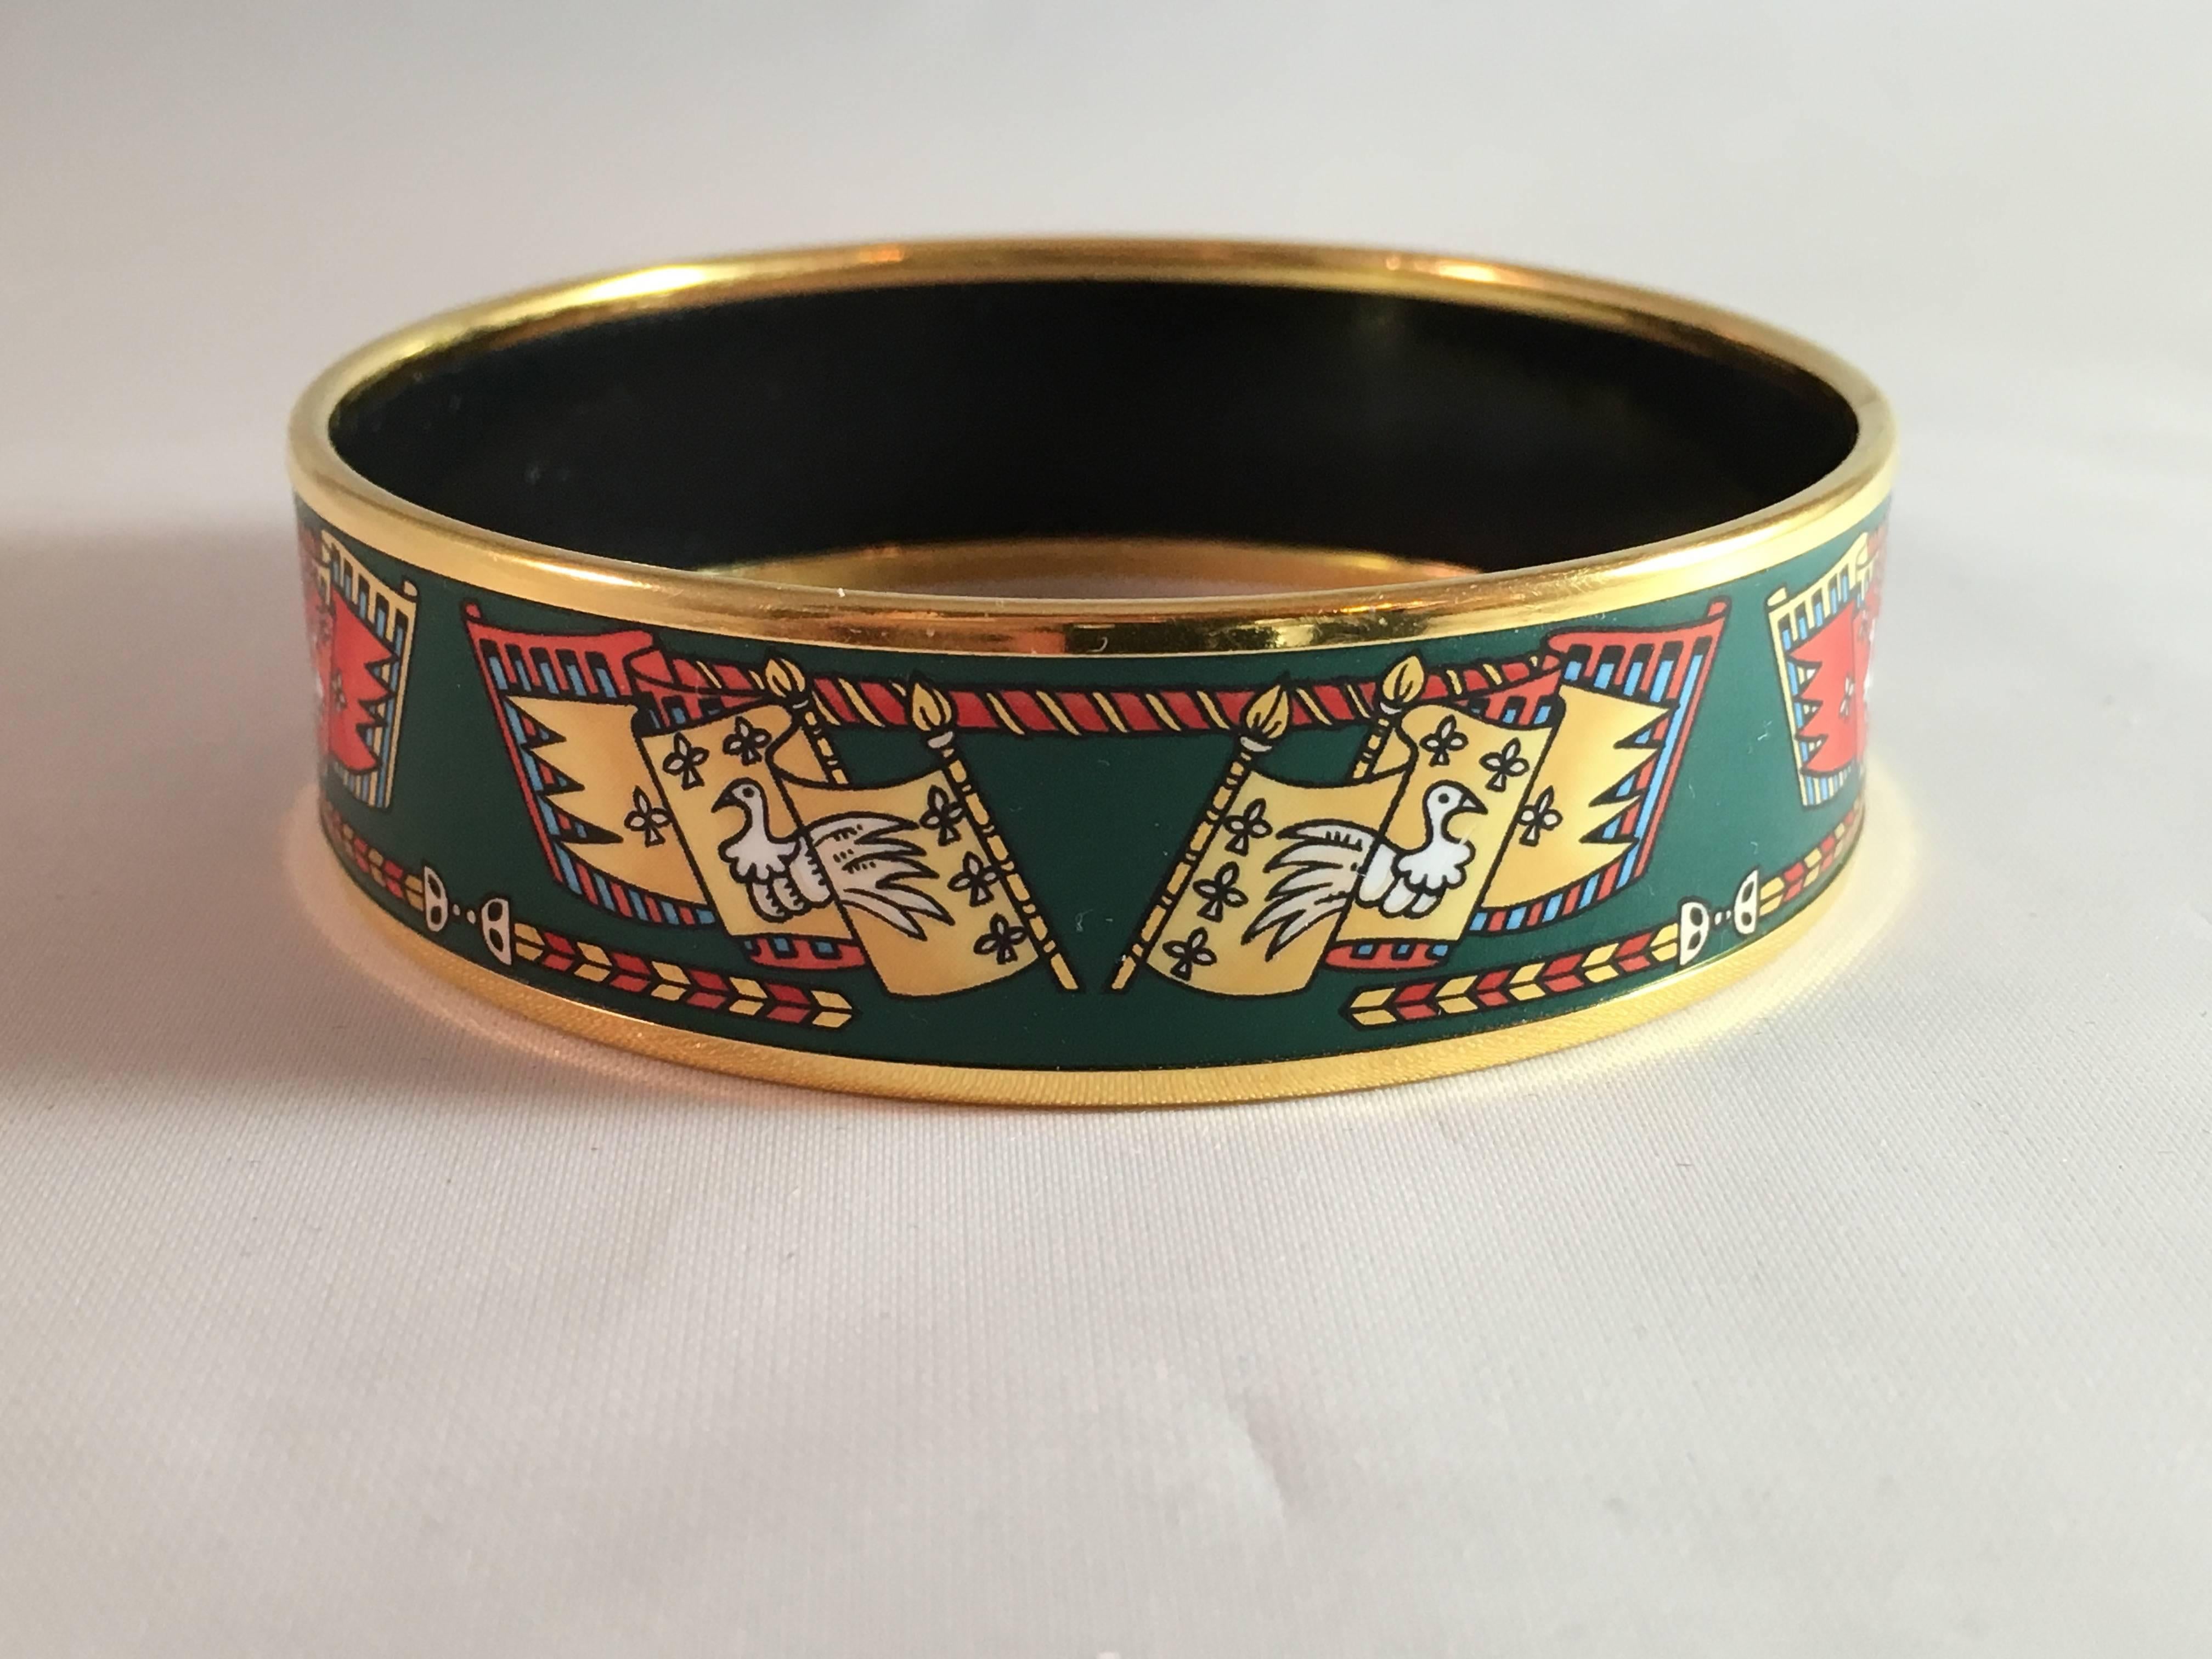 This is a great vintage printed enamel Hermes bracelet. It has a green ground with printed flags in red and gold. It is measures 7/8" wide and has an opening of 2 3/4" or 70mm. The interior is signed with a caleche coach and the words